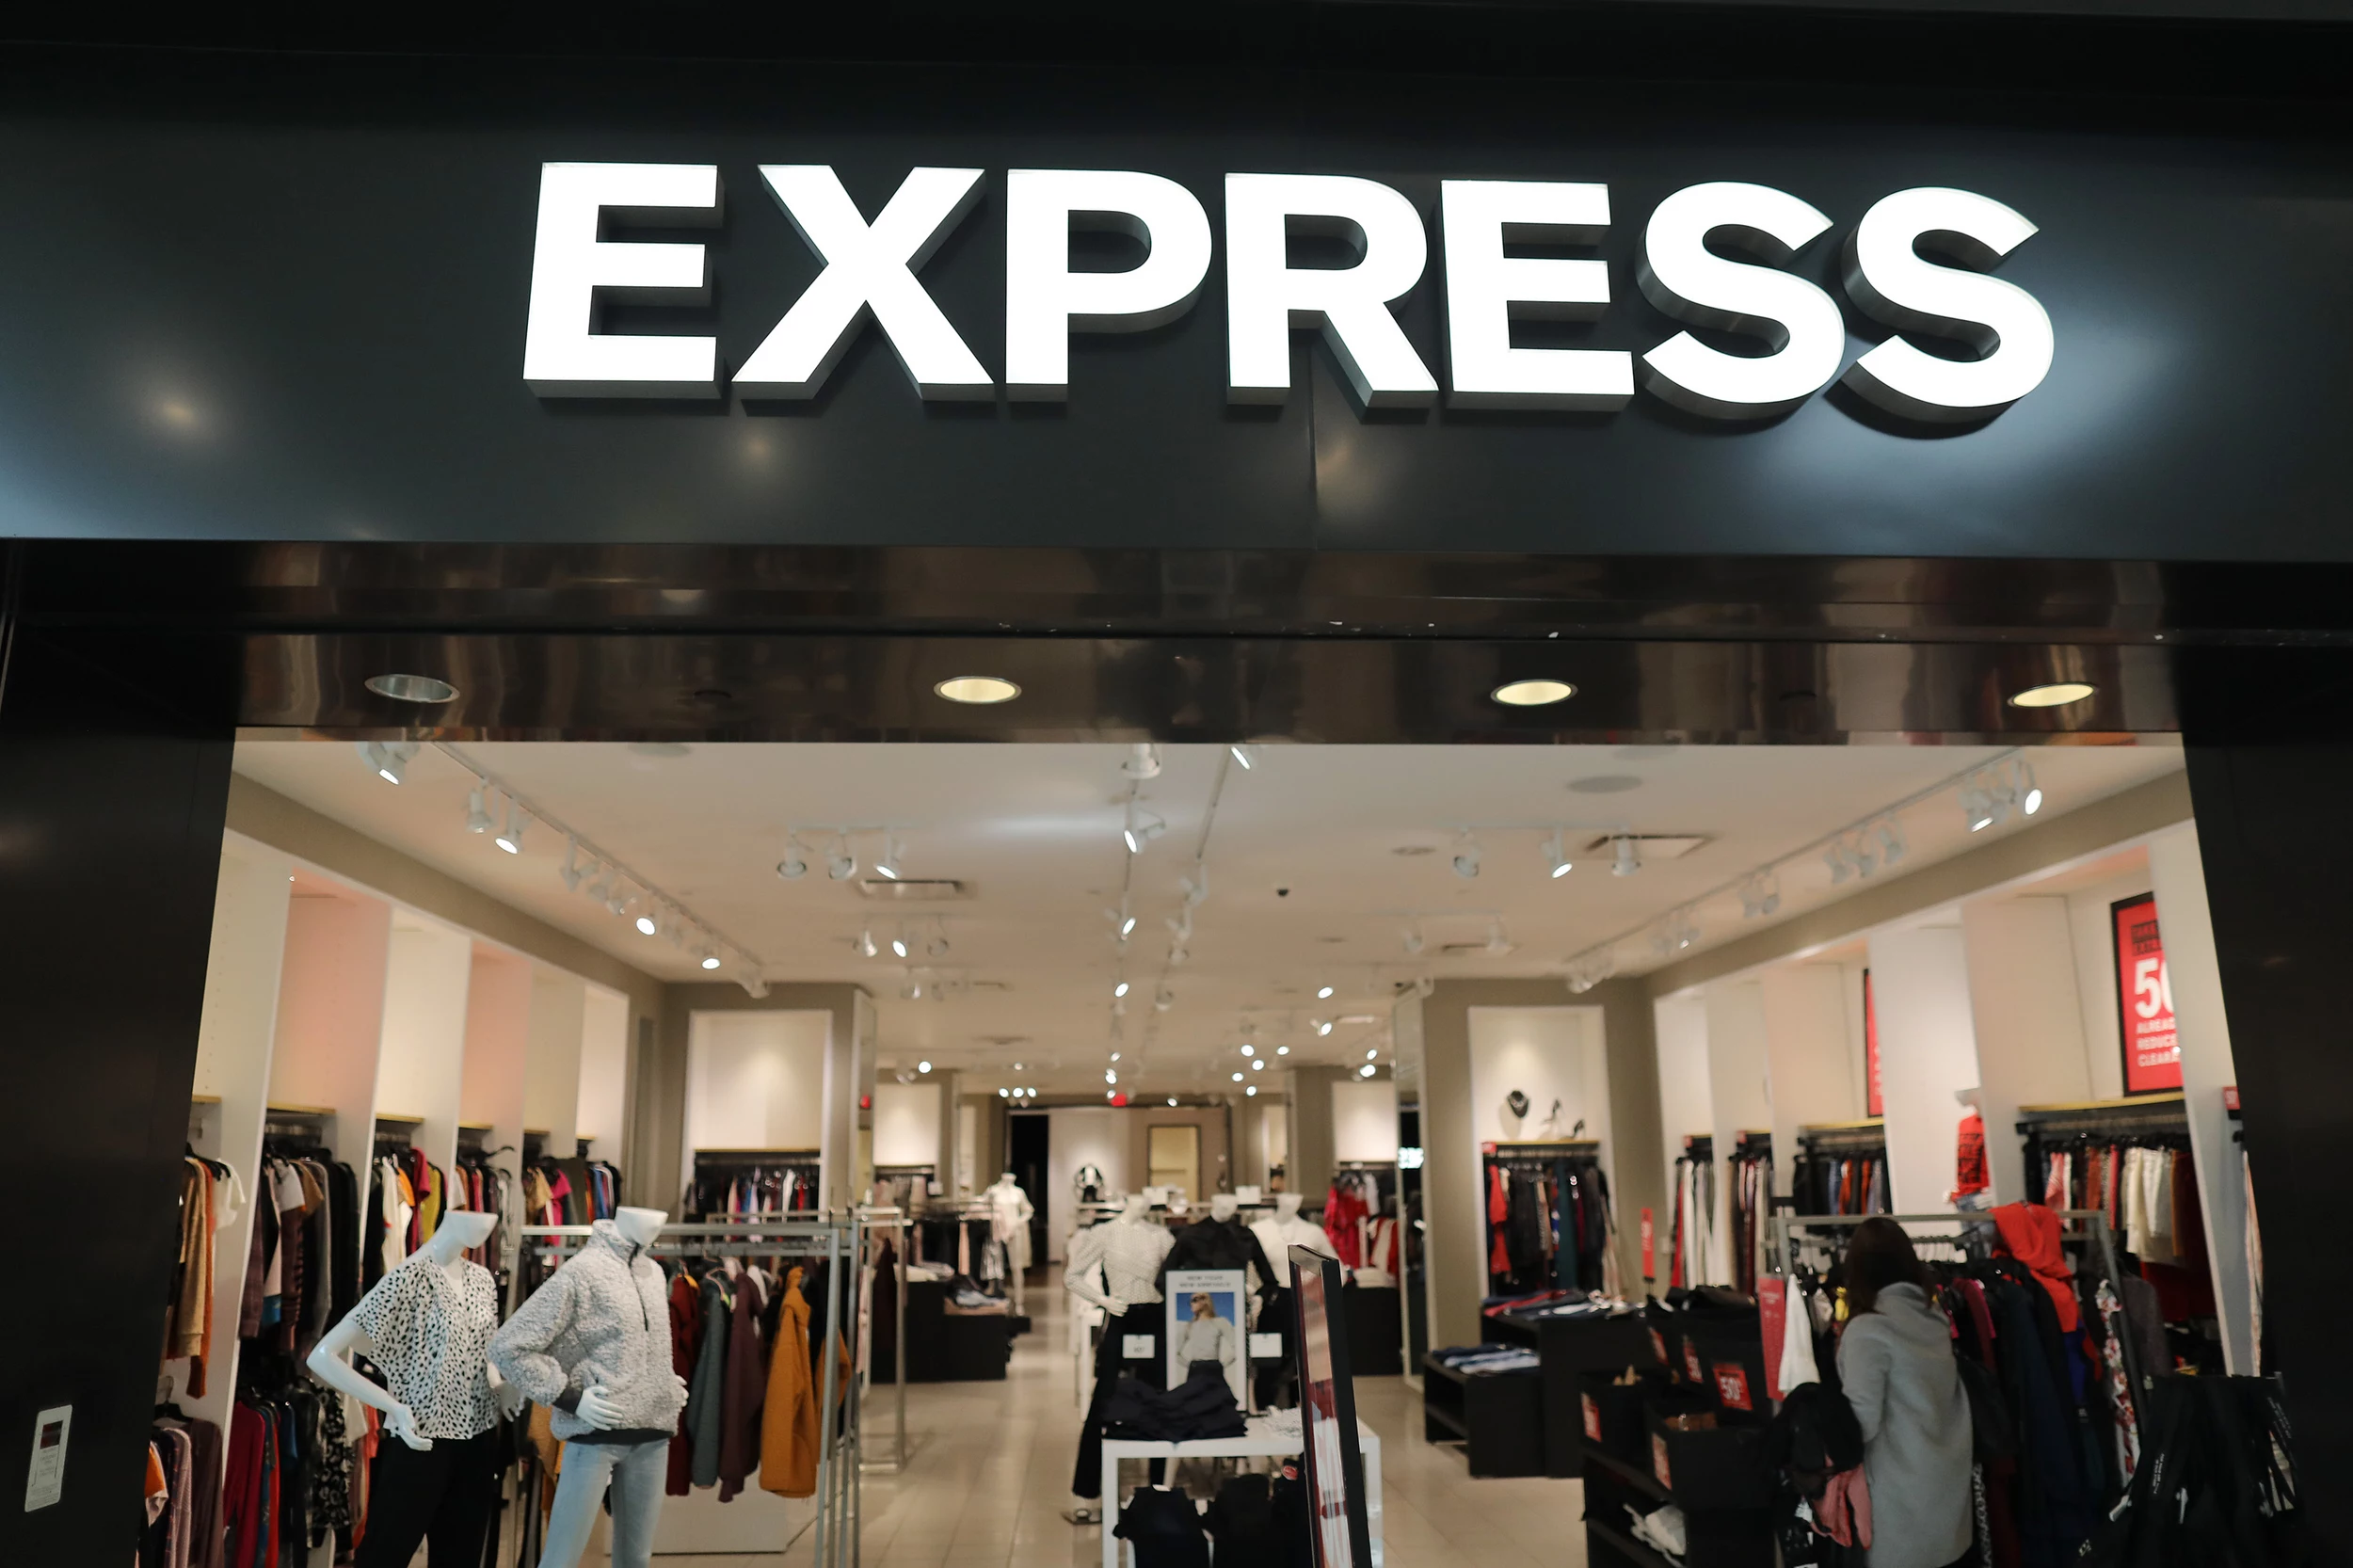 Express Clothing Chain To Close Approximately 100 Stores 